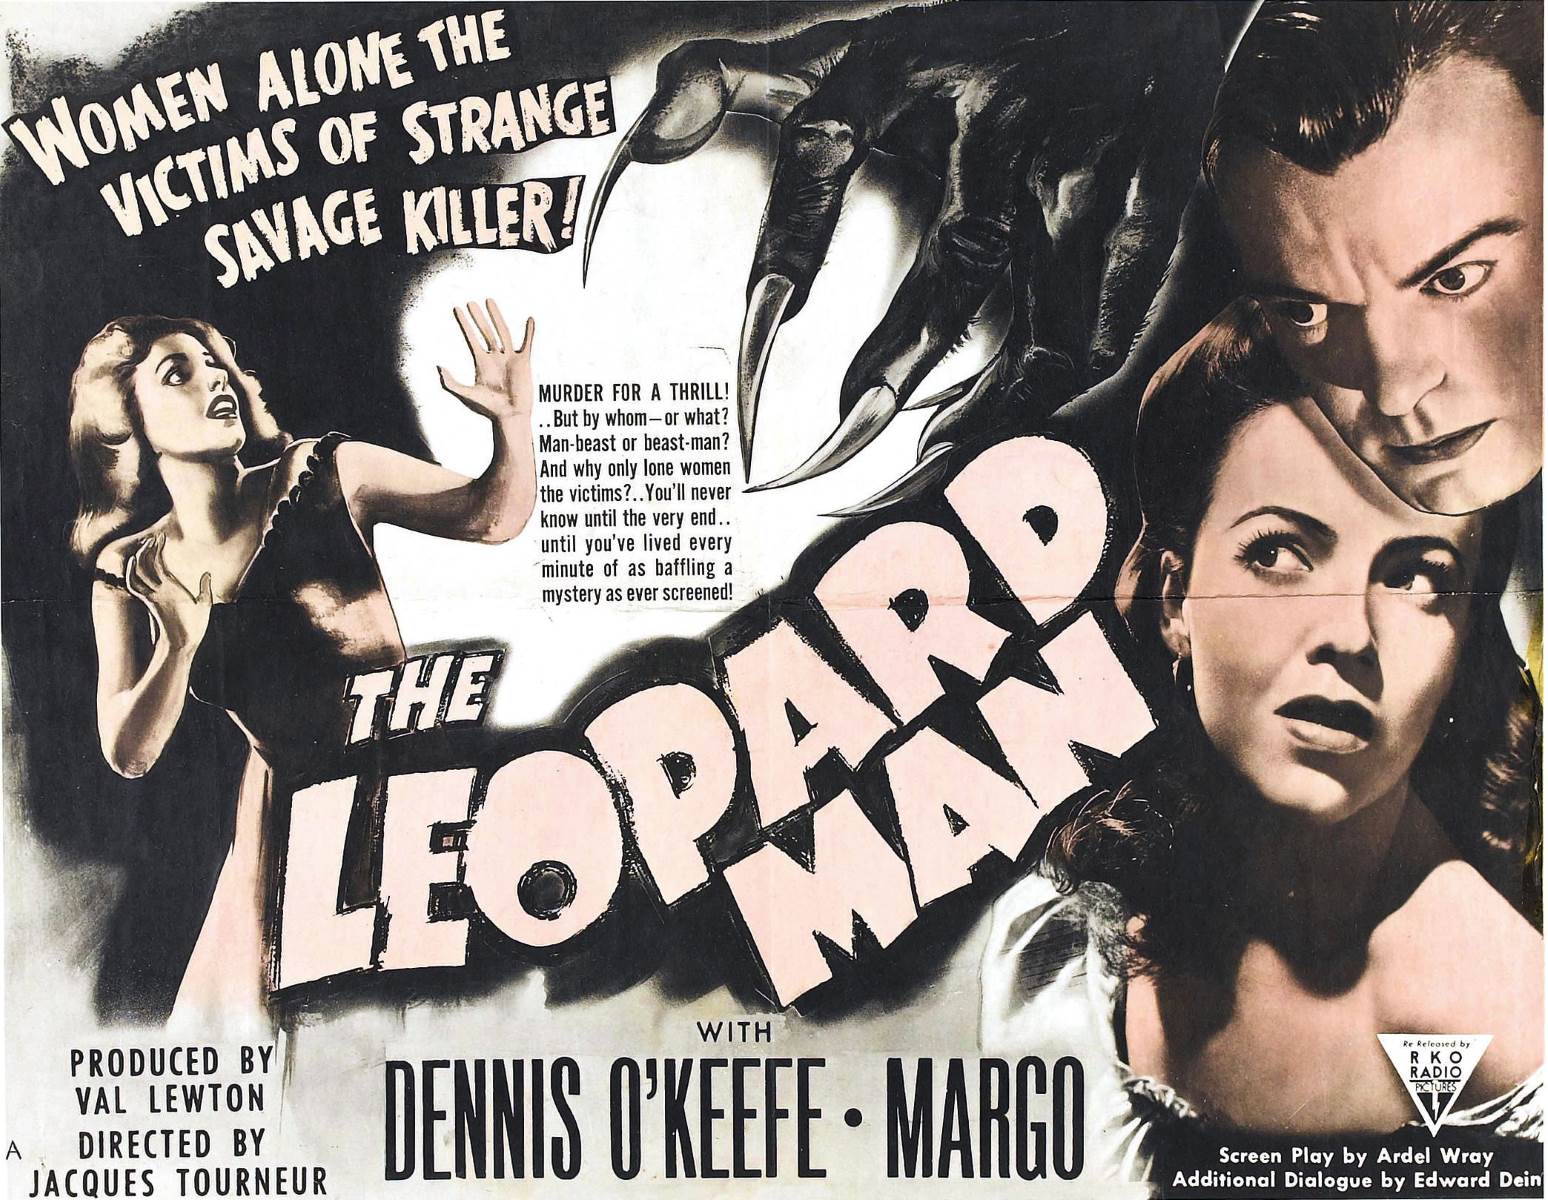 42-facts-about-the-movie-the-leopard-man